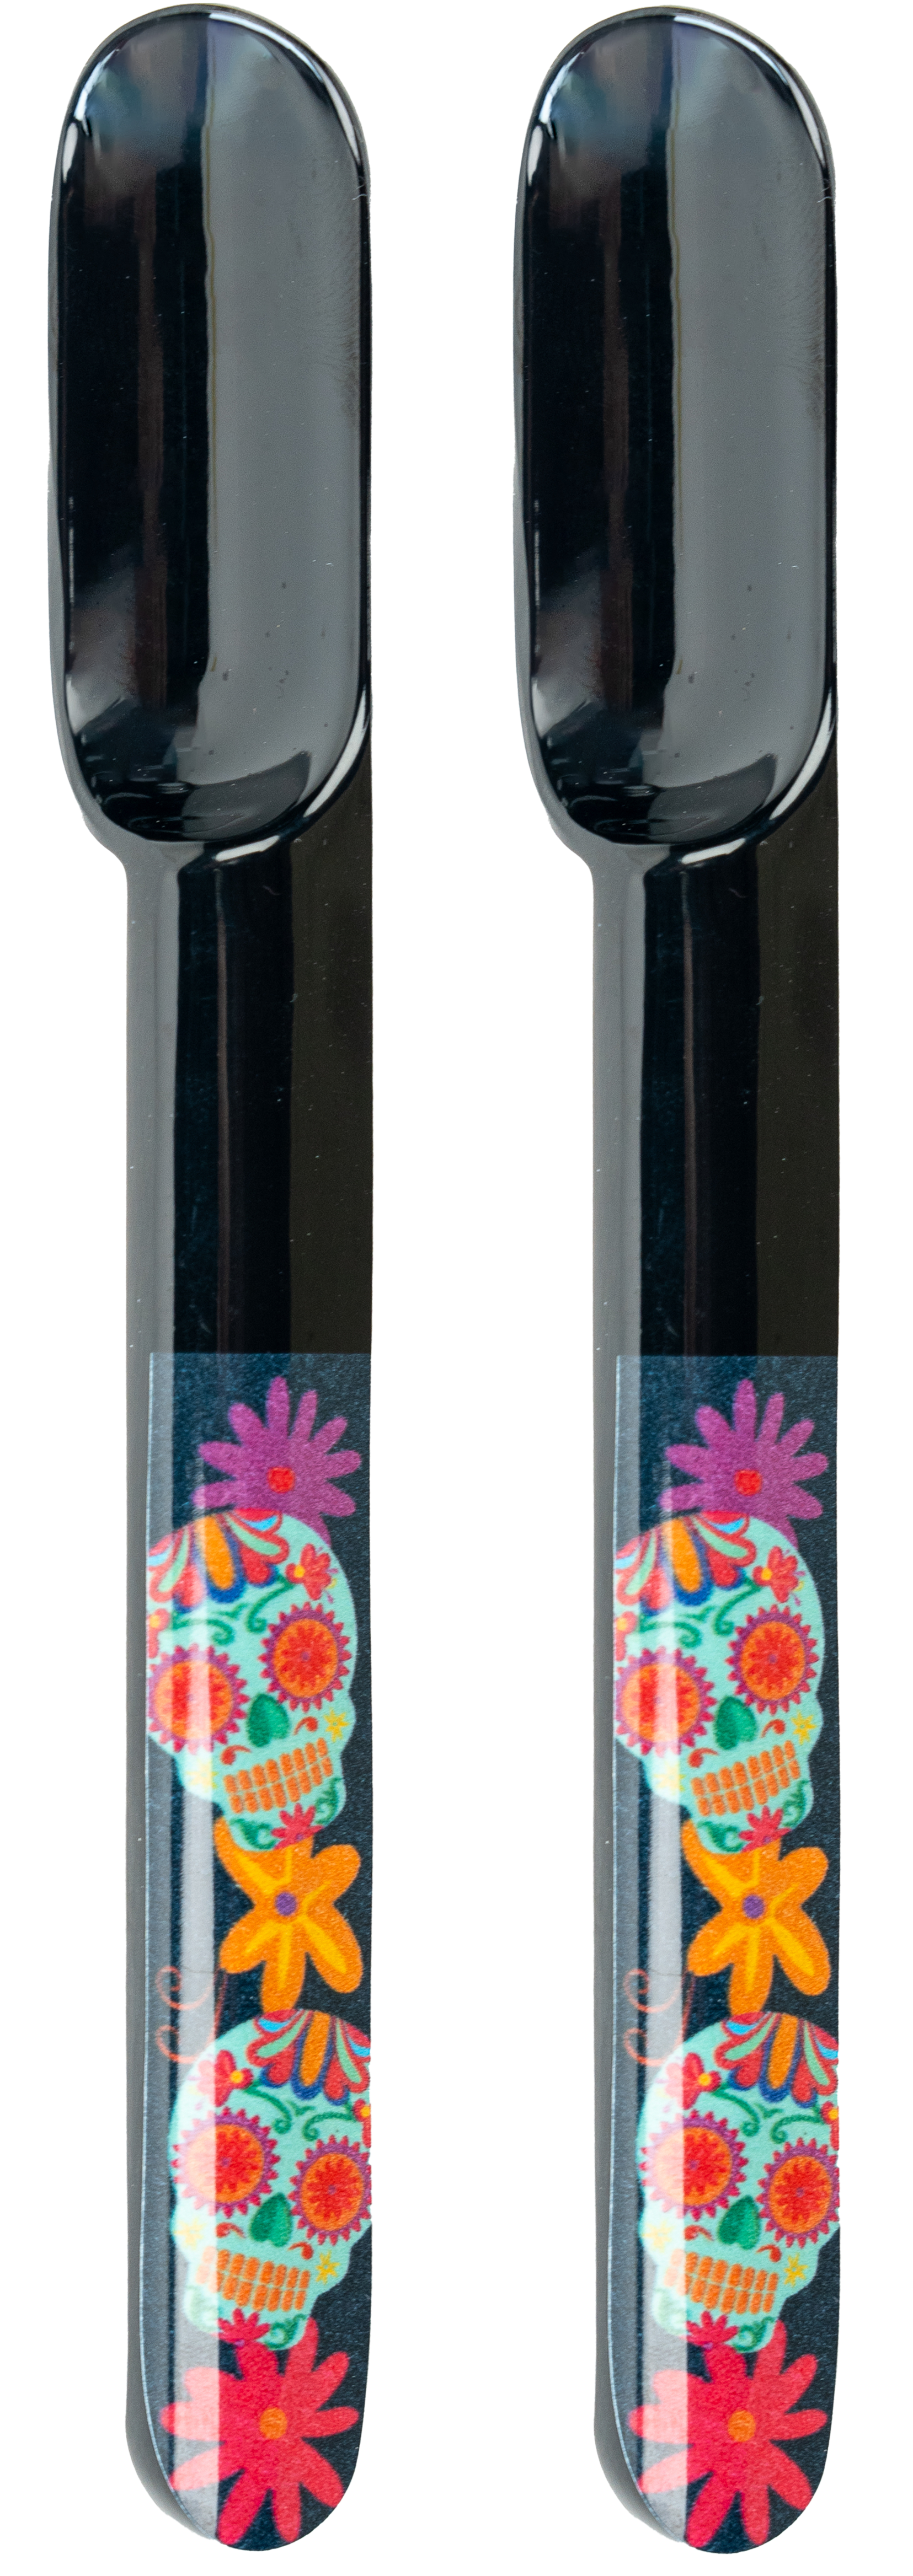 Taco Spoons - Set of 2｜DAY OF THE DEAD EDITION